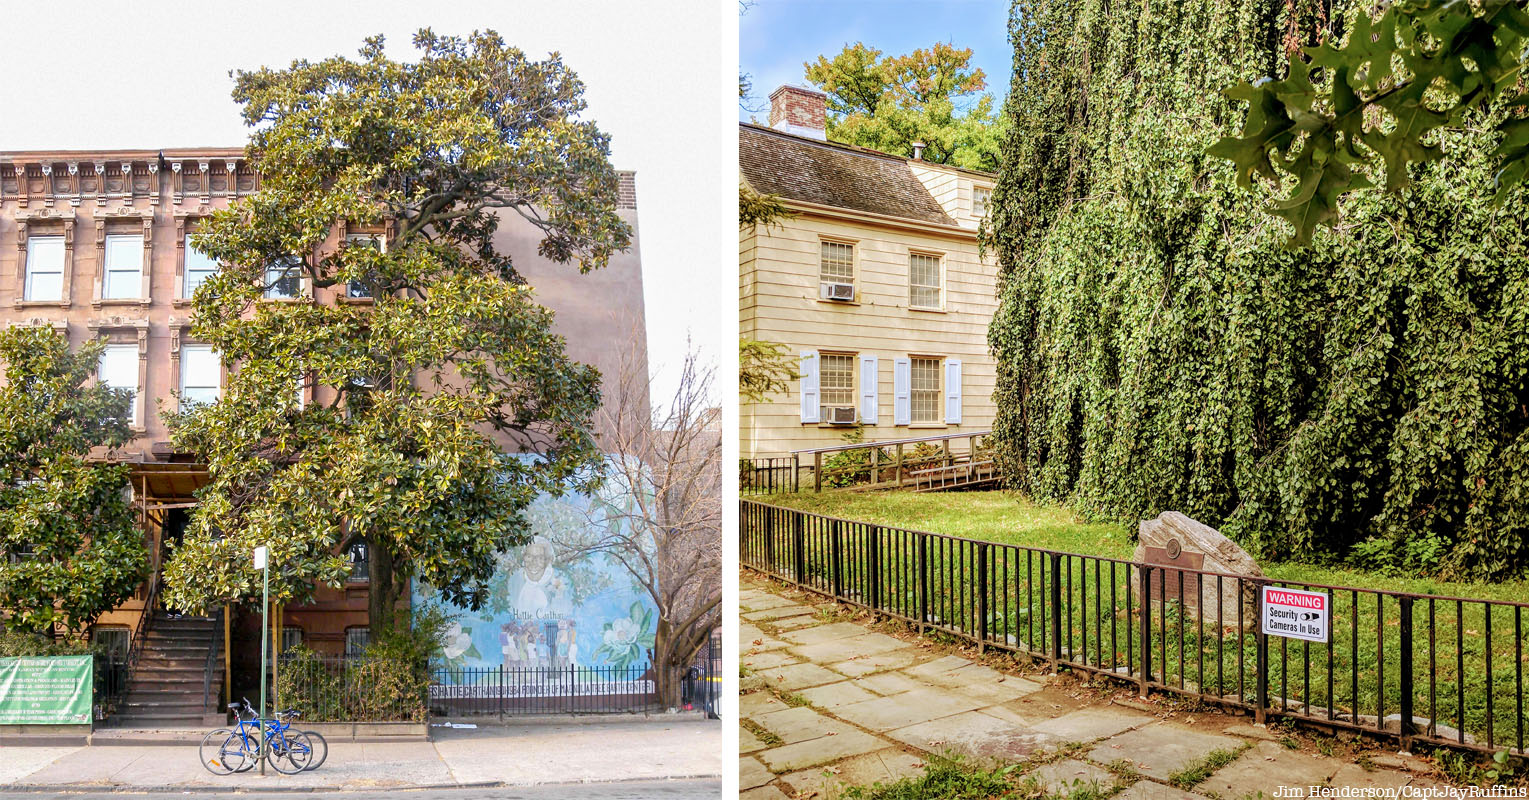 landmarked trees in NYC: magnolia grandiflora and weeping beech tree